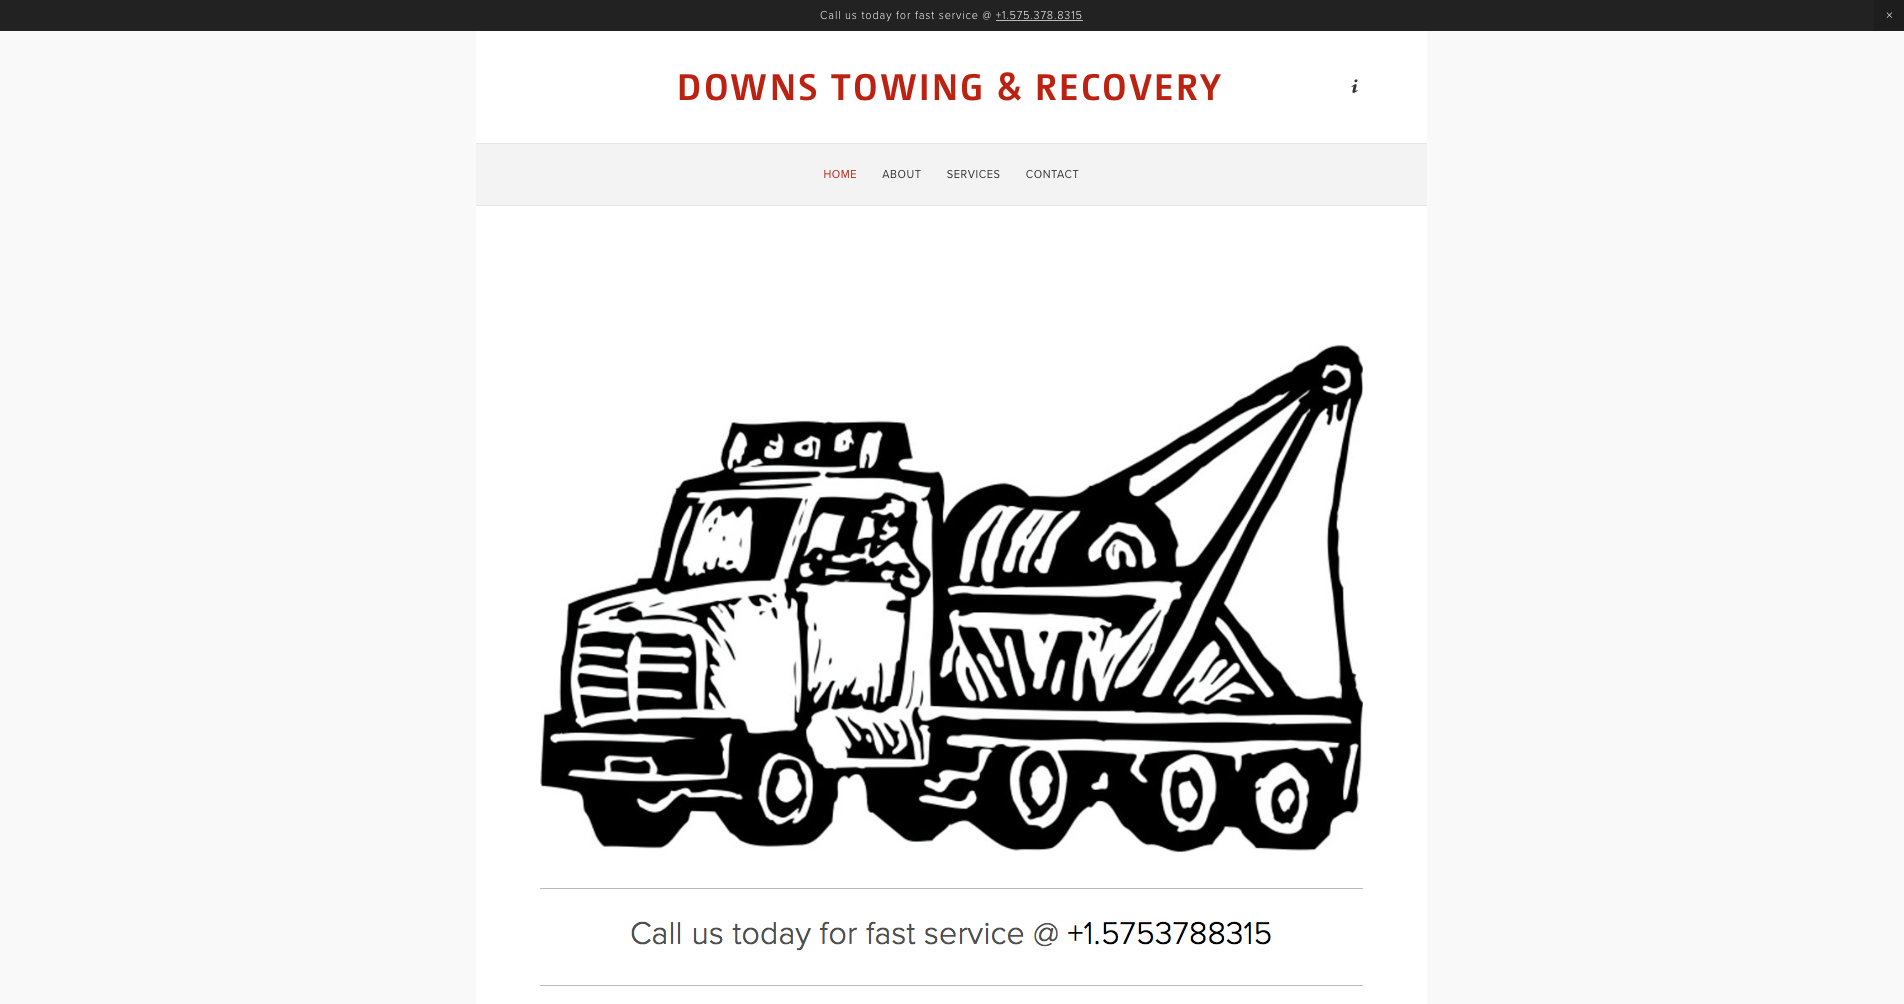 DownsTowing.com